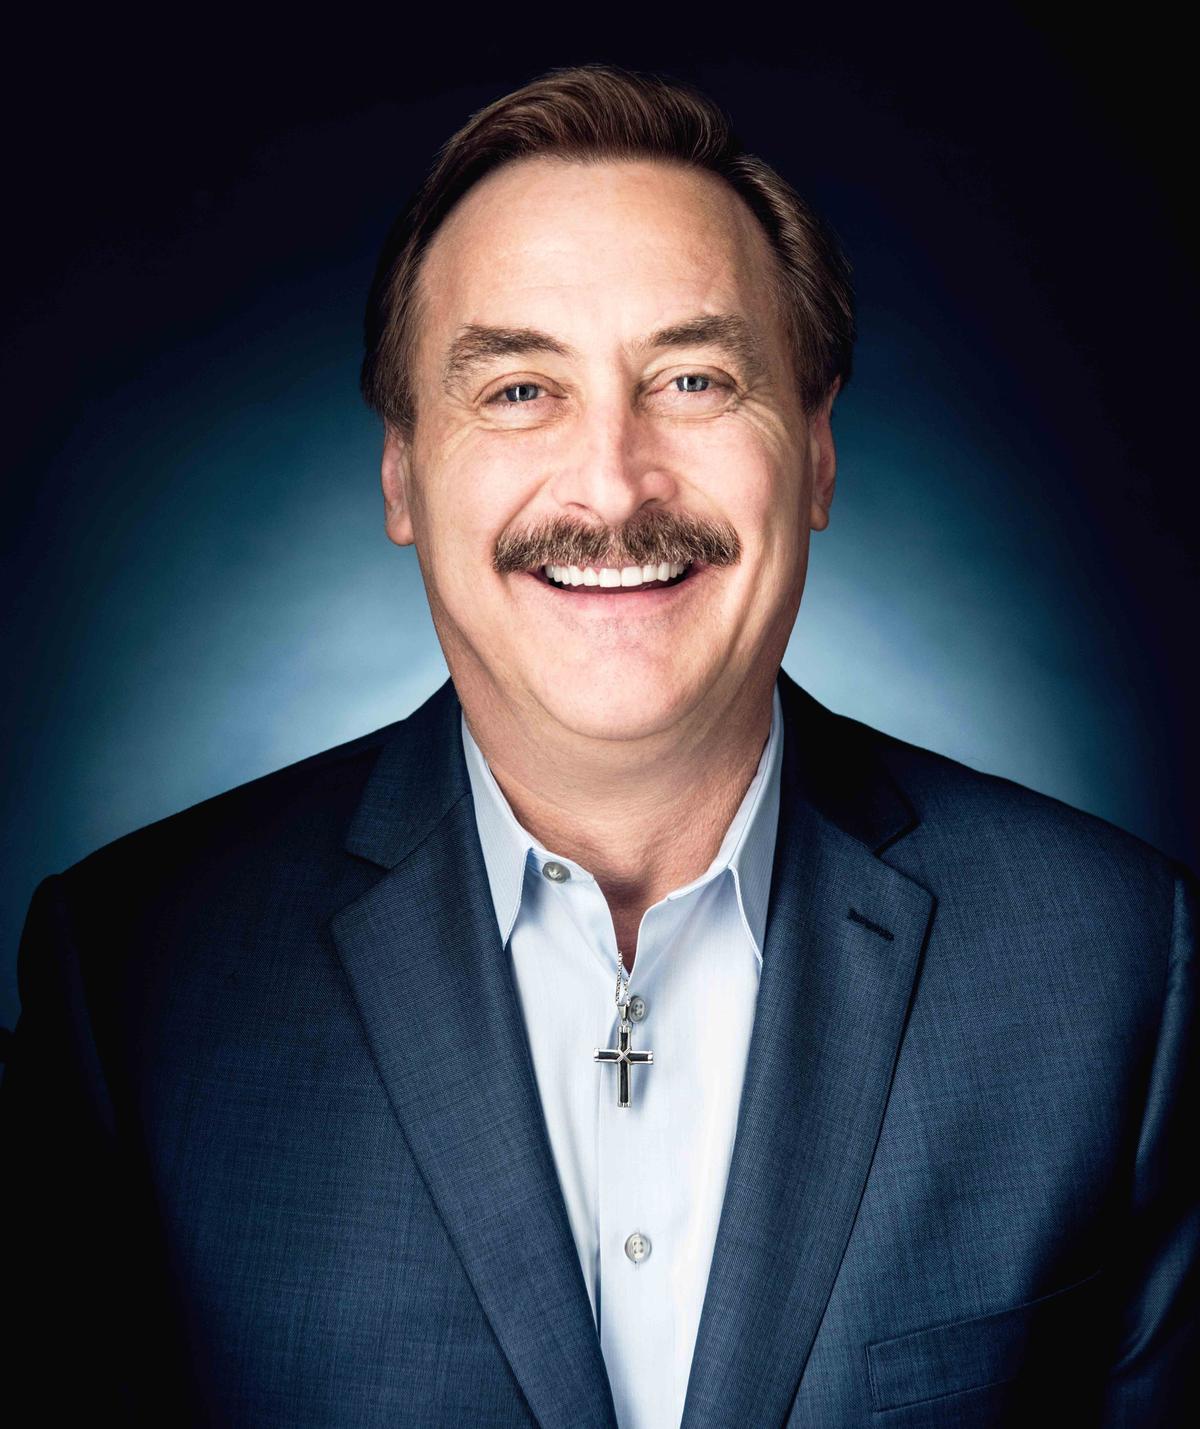 MyPillow founder Mike Lindell (Courtesy of Mike Lindell)